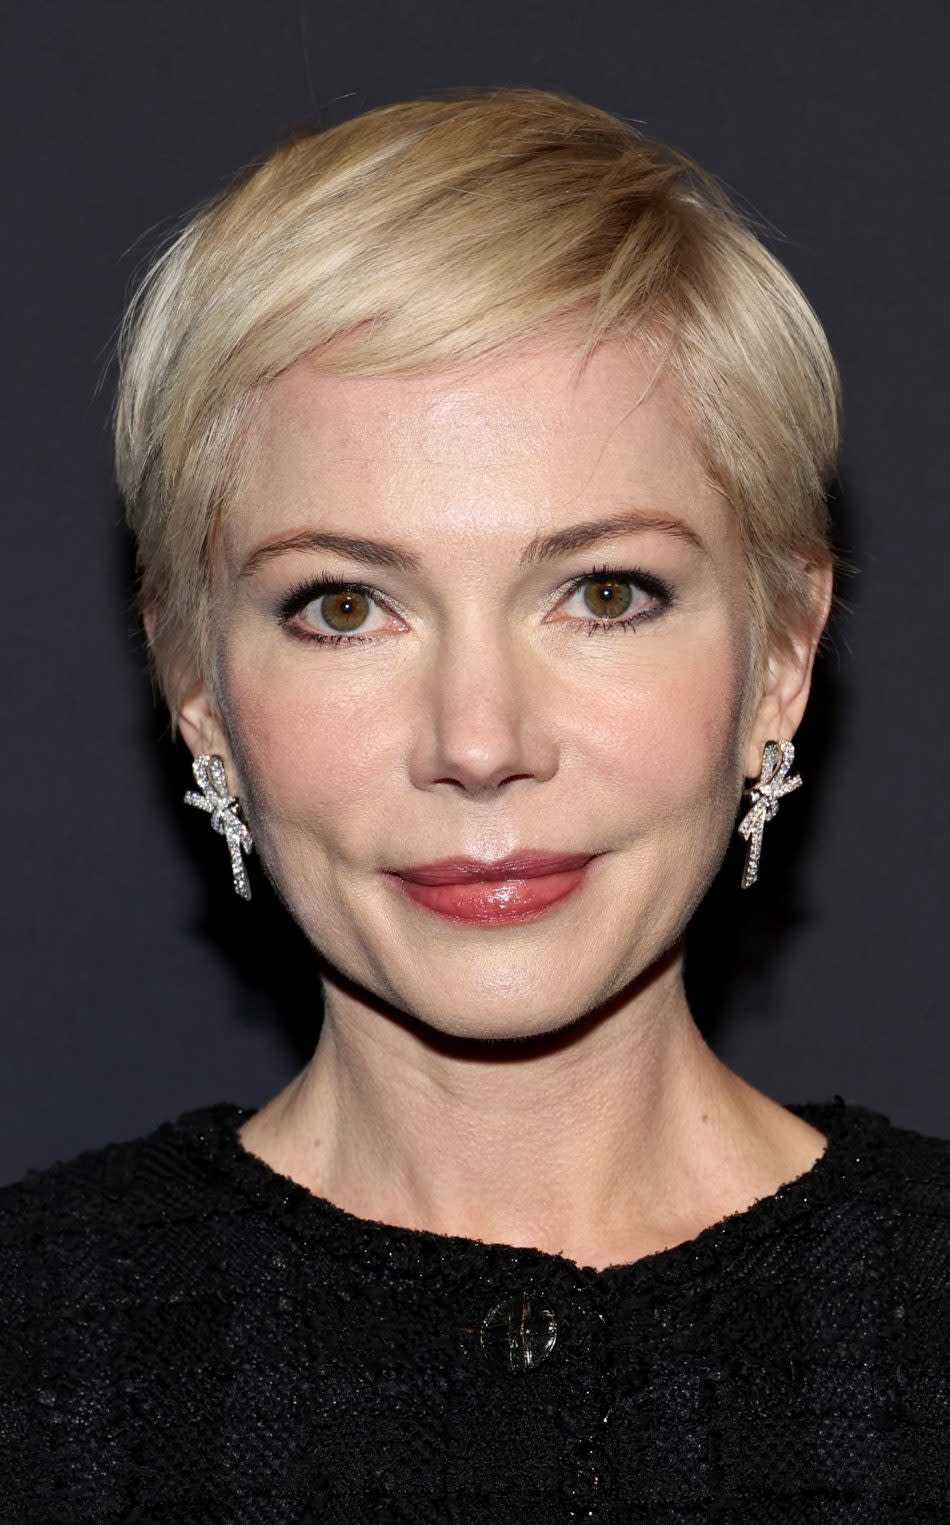 Michelle Williams wears her short hair soft and fluffy